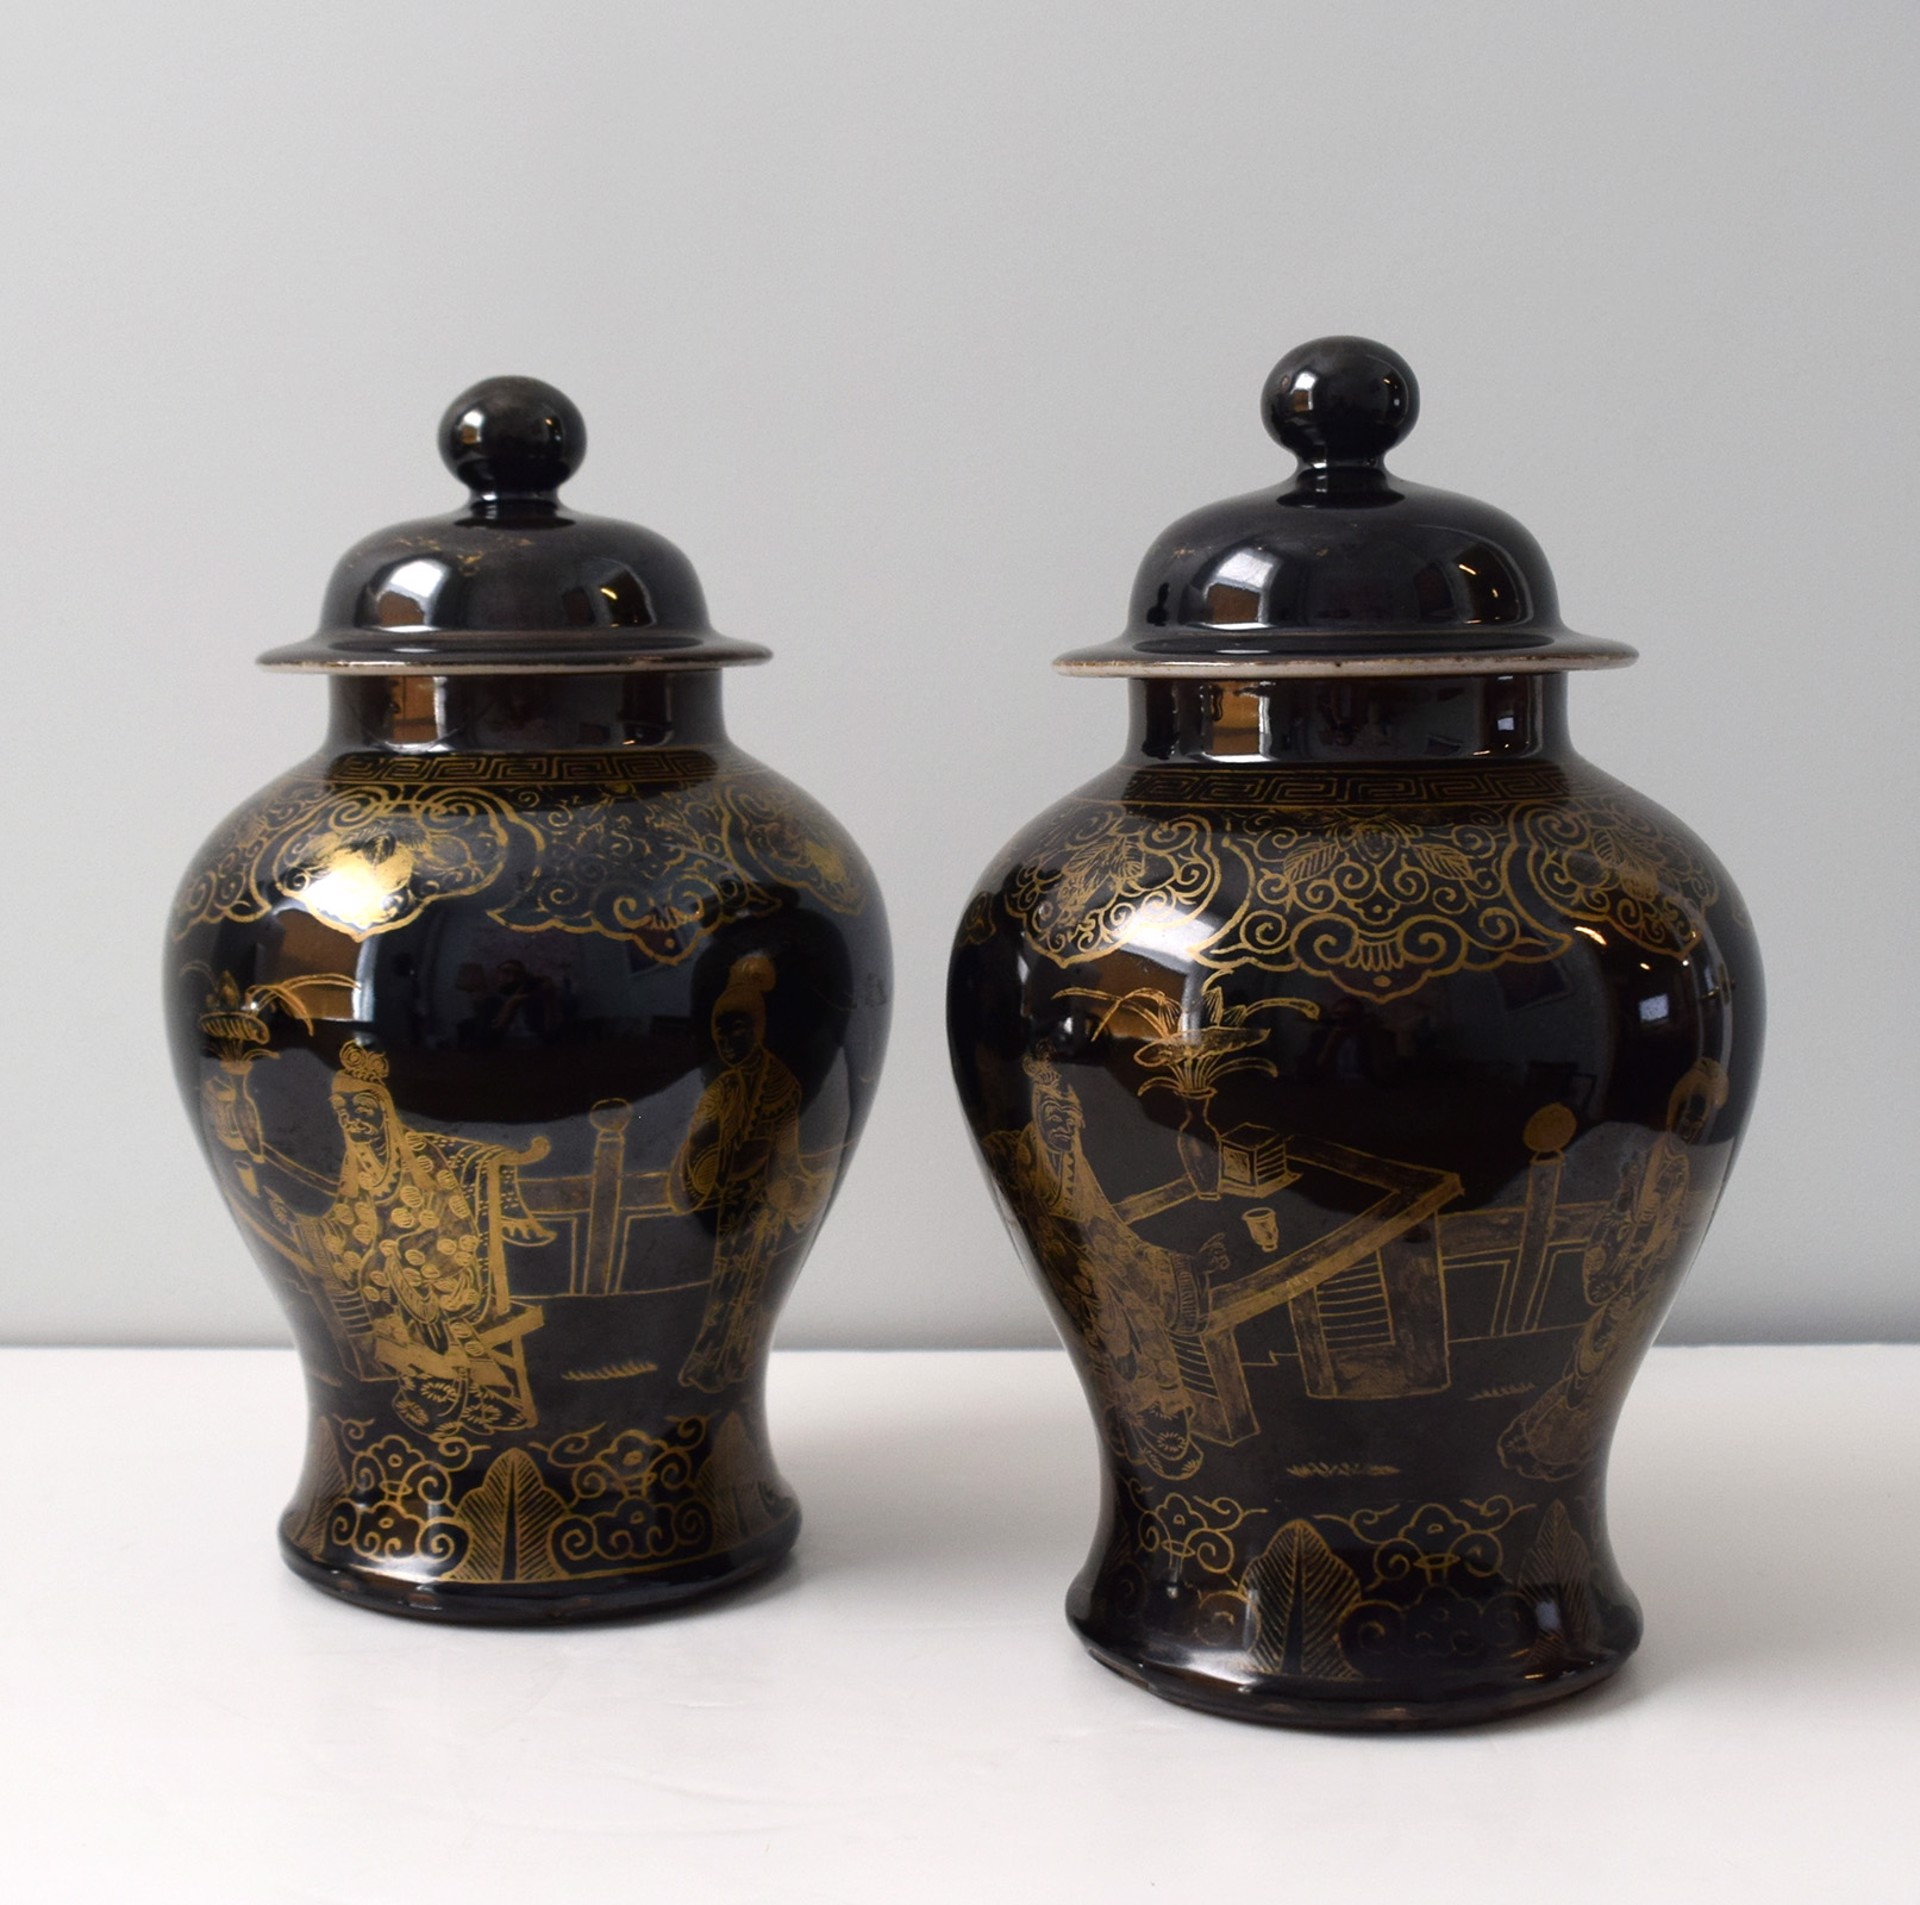 PAIR OF BLACK GROUND AND GILT BALUSTER JARS AND COVERS WITH FIGURES